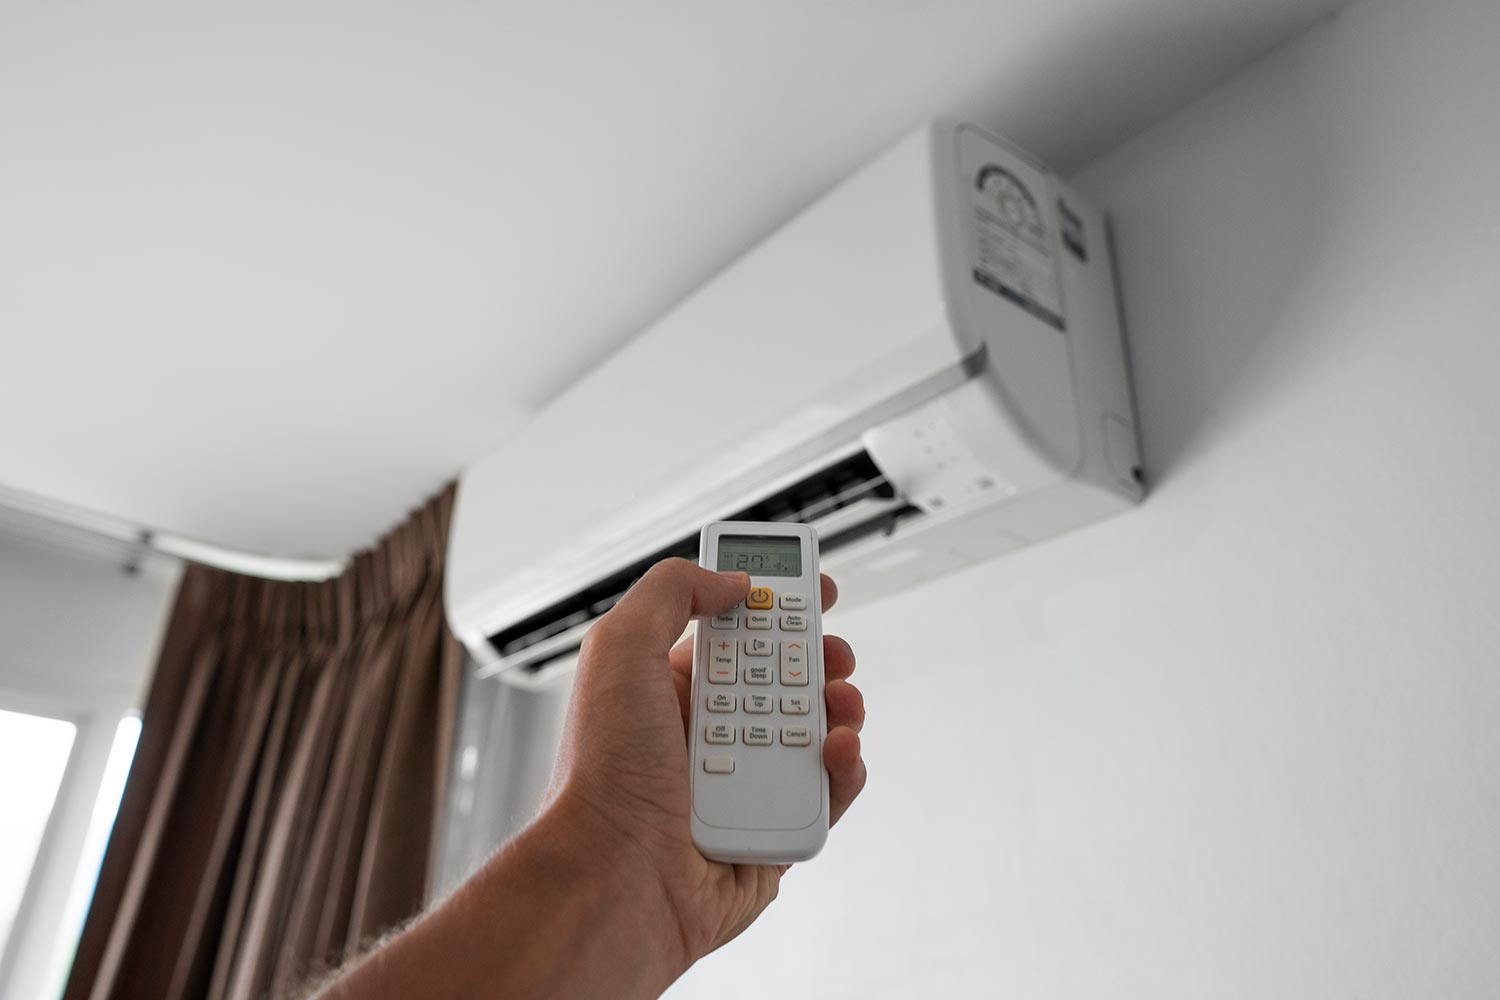 Hand holding rc and adjusting temperature of air conditioner mounted on a white wall